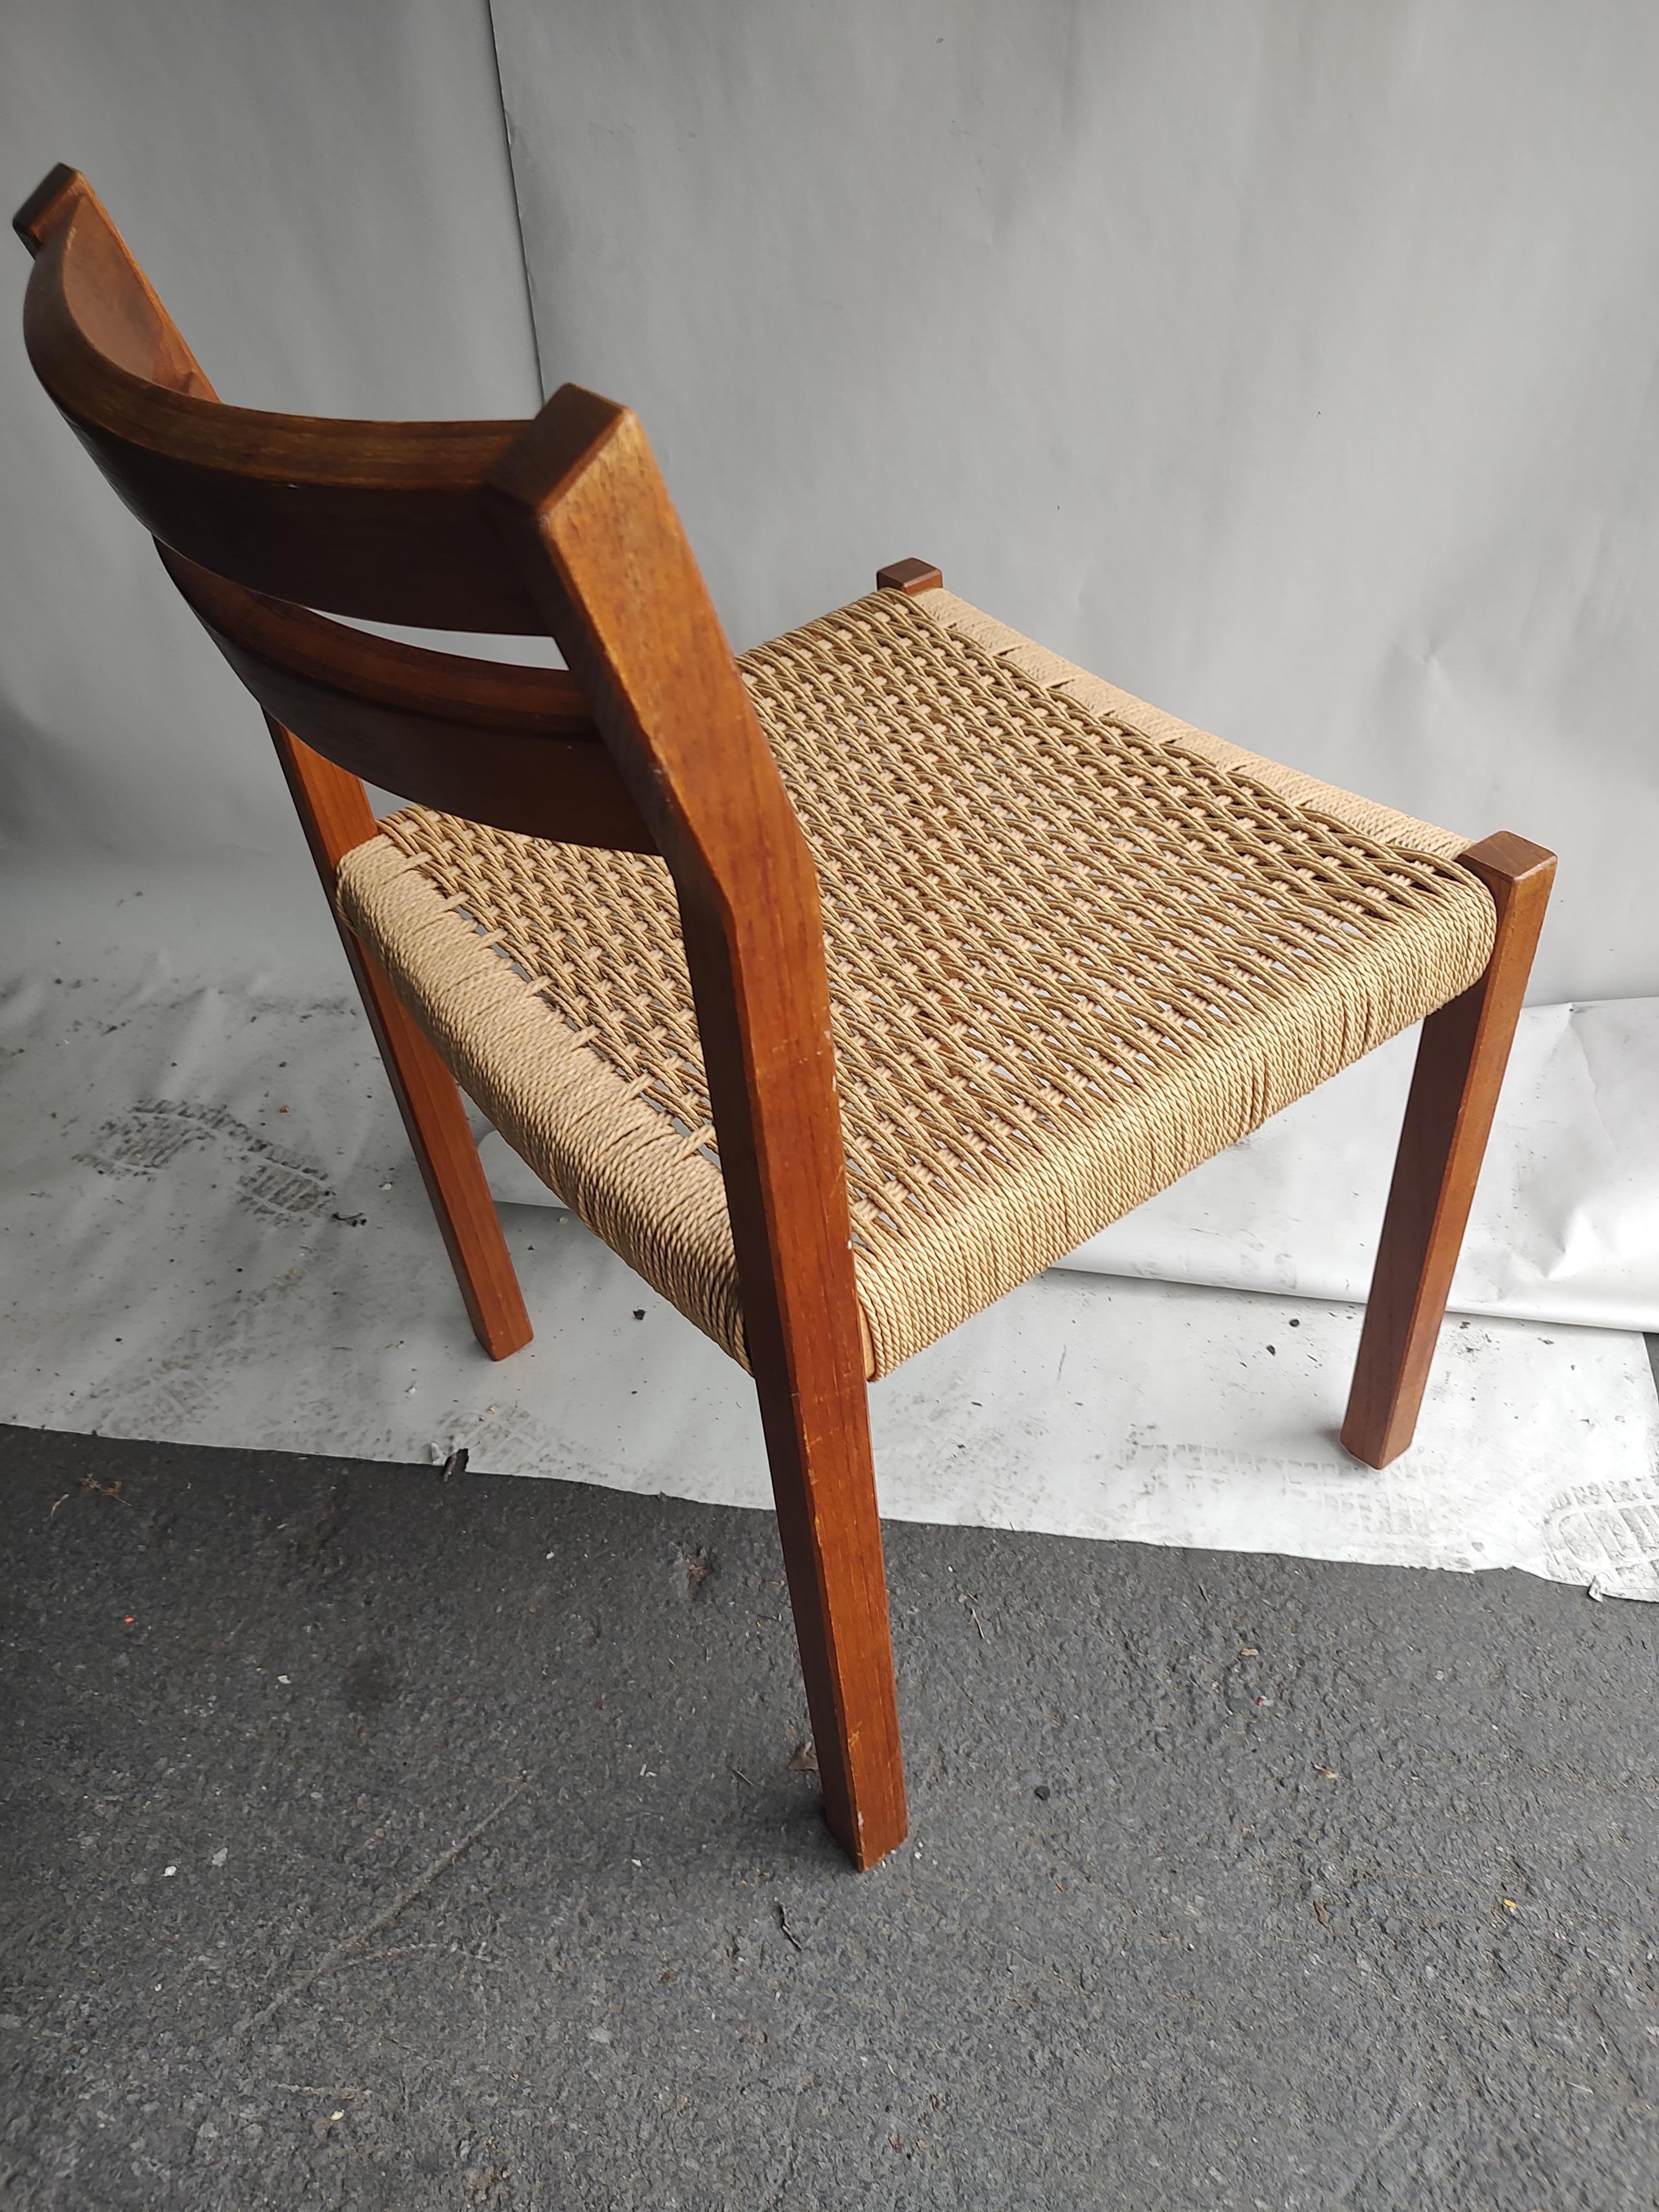 Fabulous simple and elegant single teak dining or desk chair. Teak frame with rope seat hand woven. In excellent vintage condition with minimal wear.